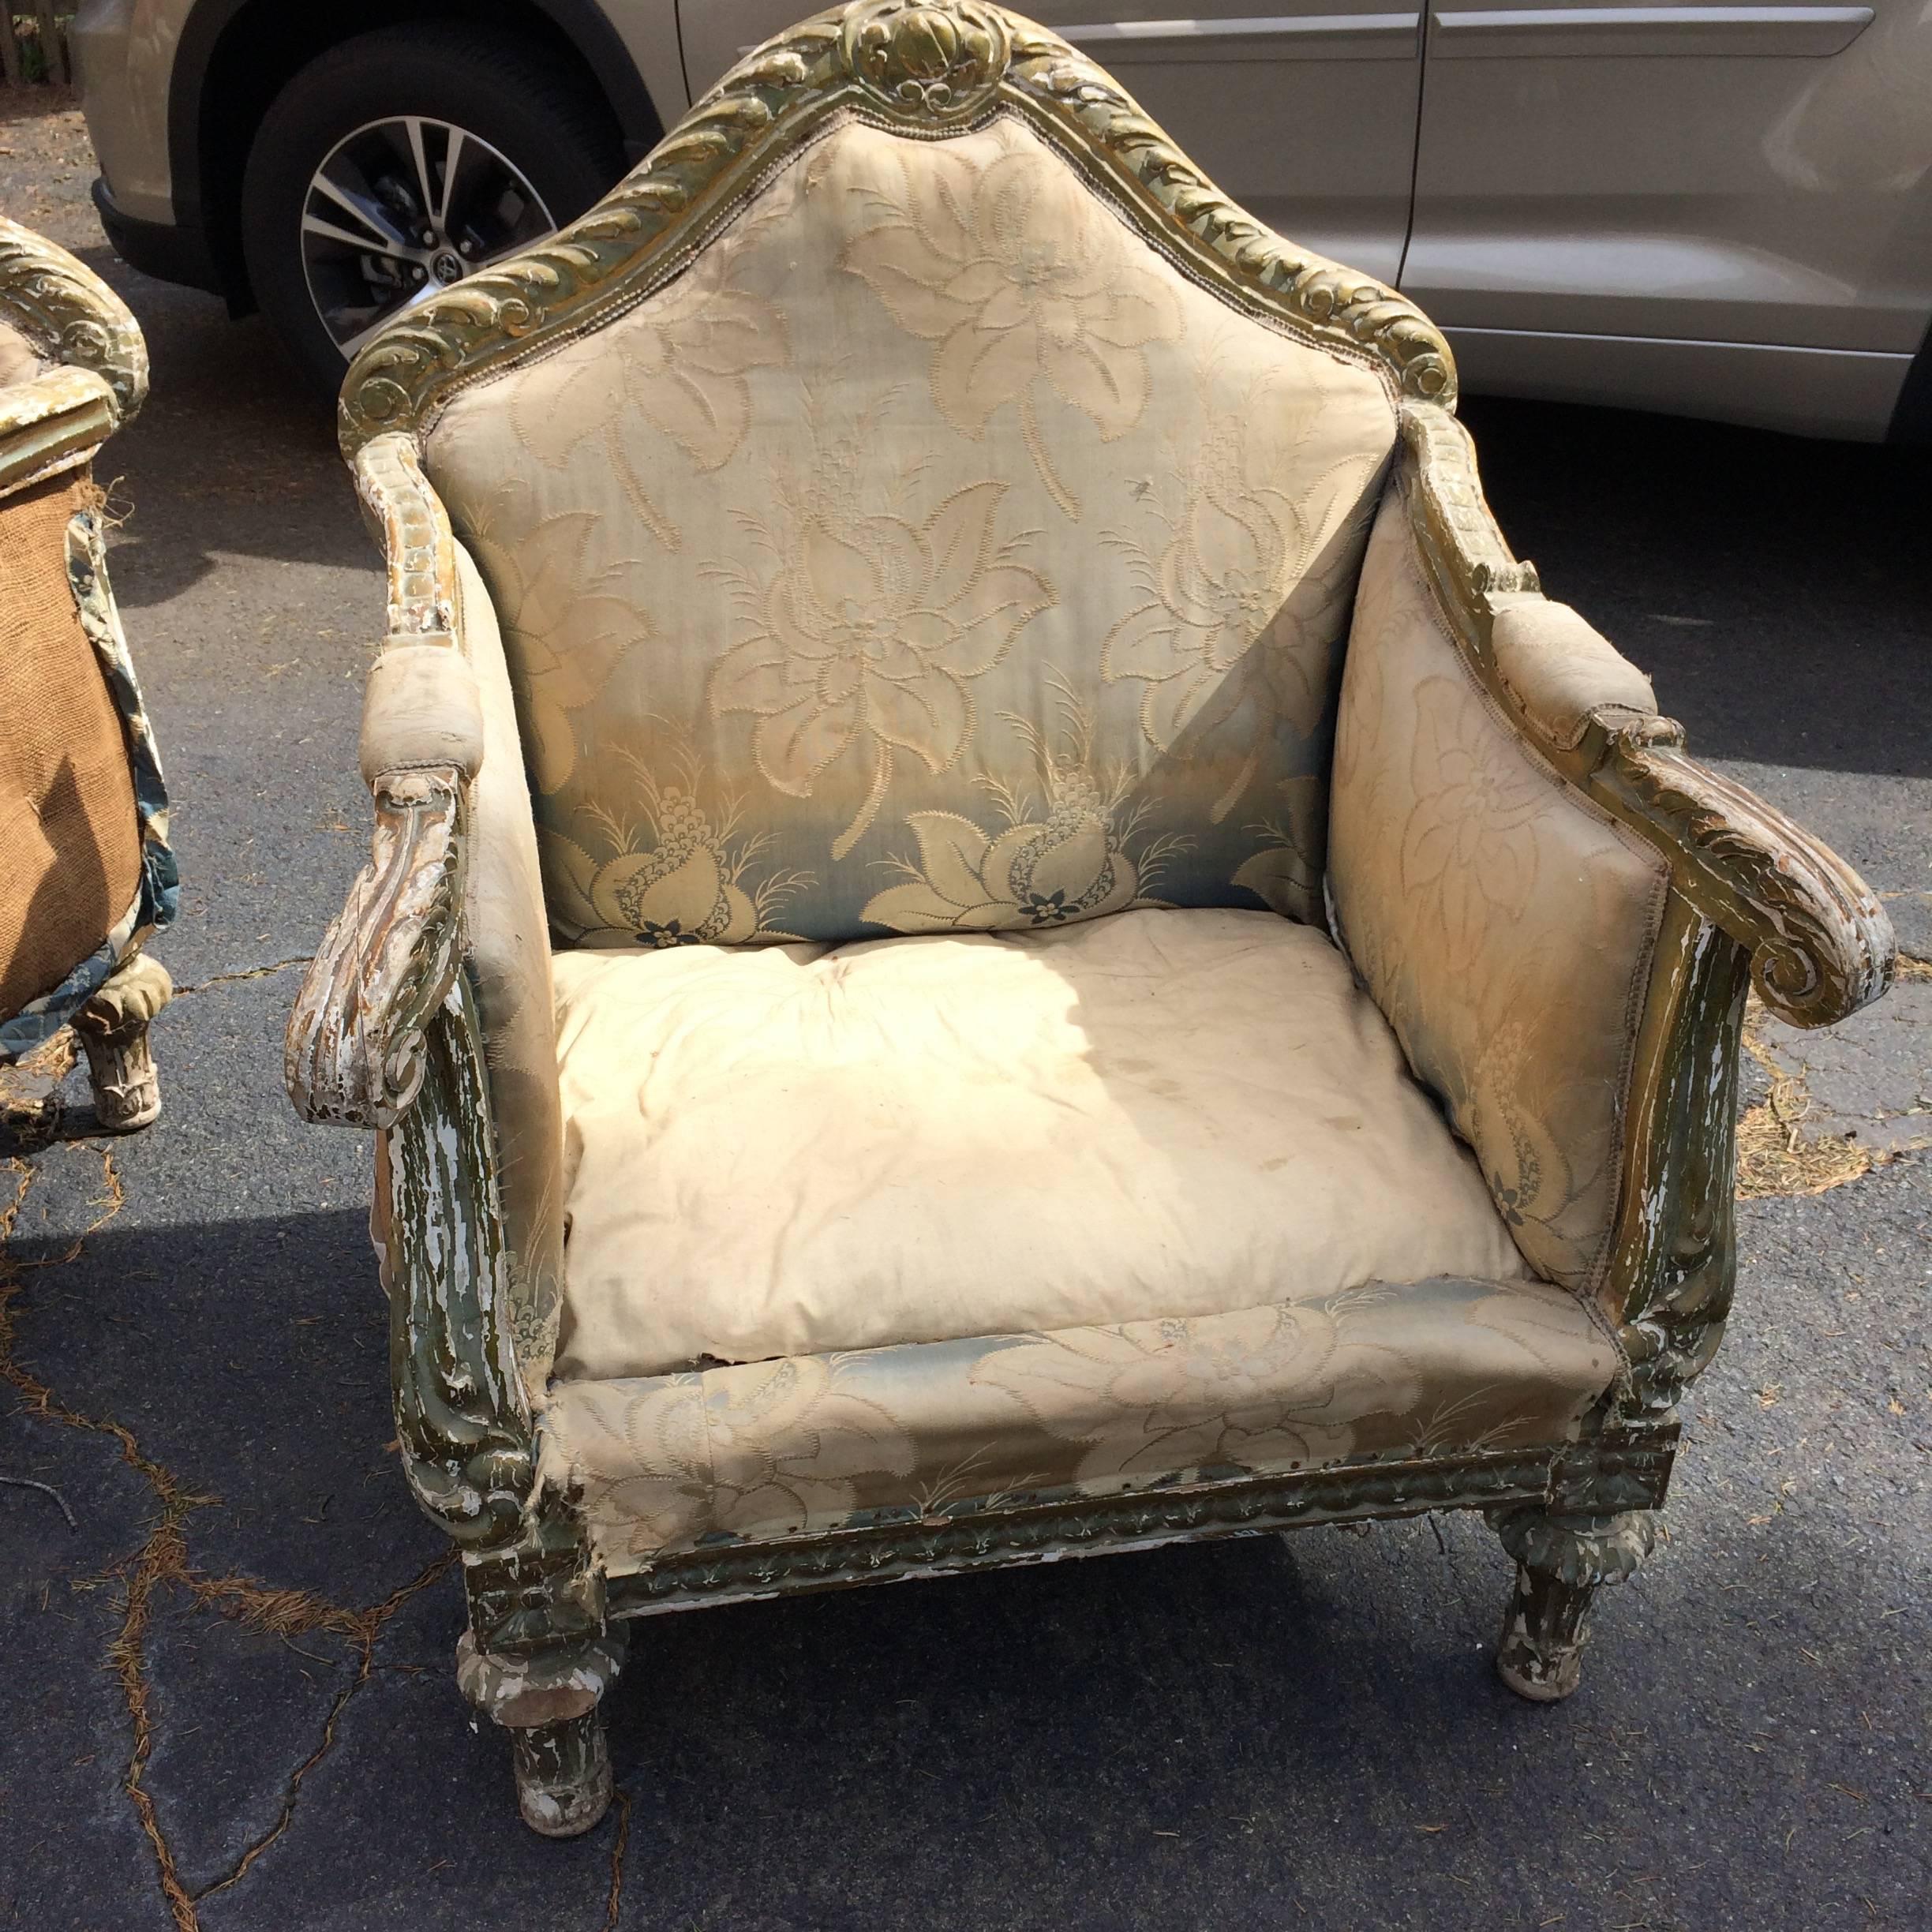 Two very large regal club chairs that need a good upholsterer but have refined elegant structure, original distressed paint on elaborately carved frames and window pane back. Priced accordingly. Seat depth 23.75
Note: There are four side dining